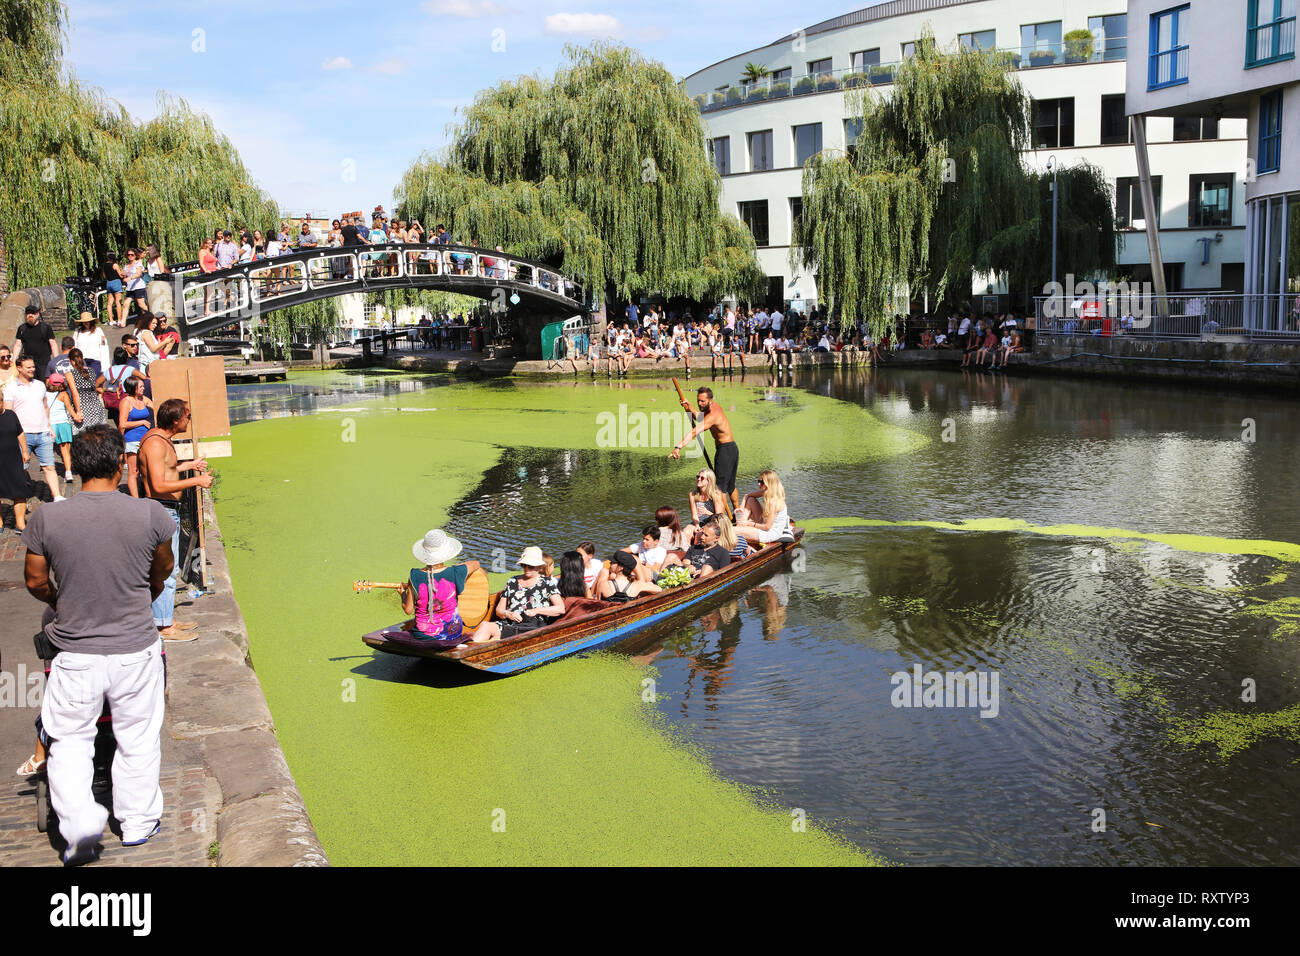 Near pastoral scene of people enjoying a sunny day at Regent's Canal near Camden Market in the heart of London, United Kingdom Stock Photo